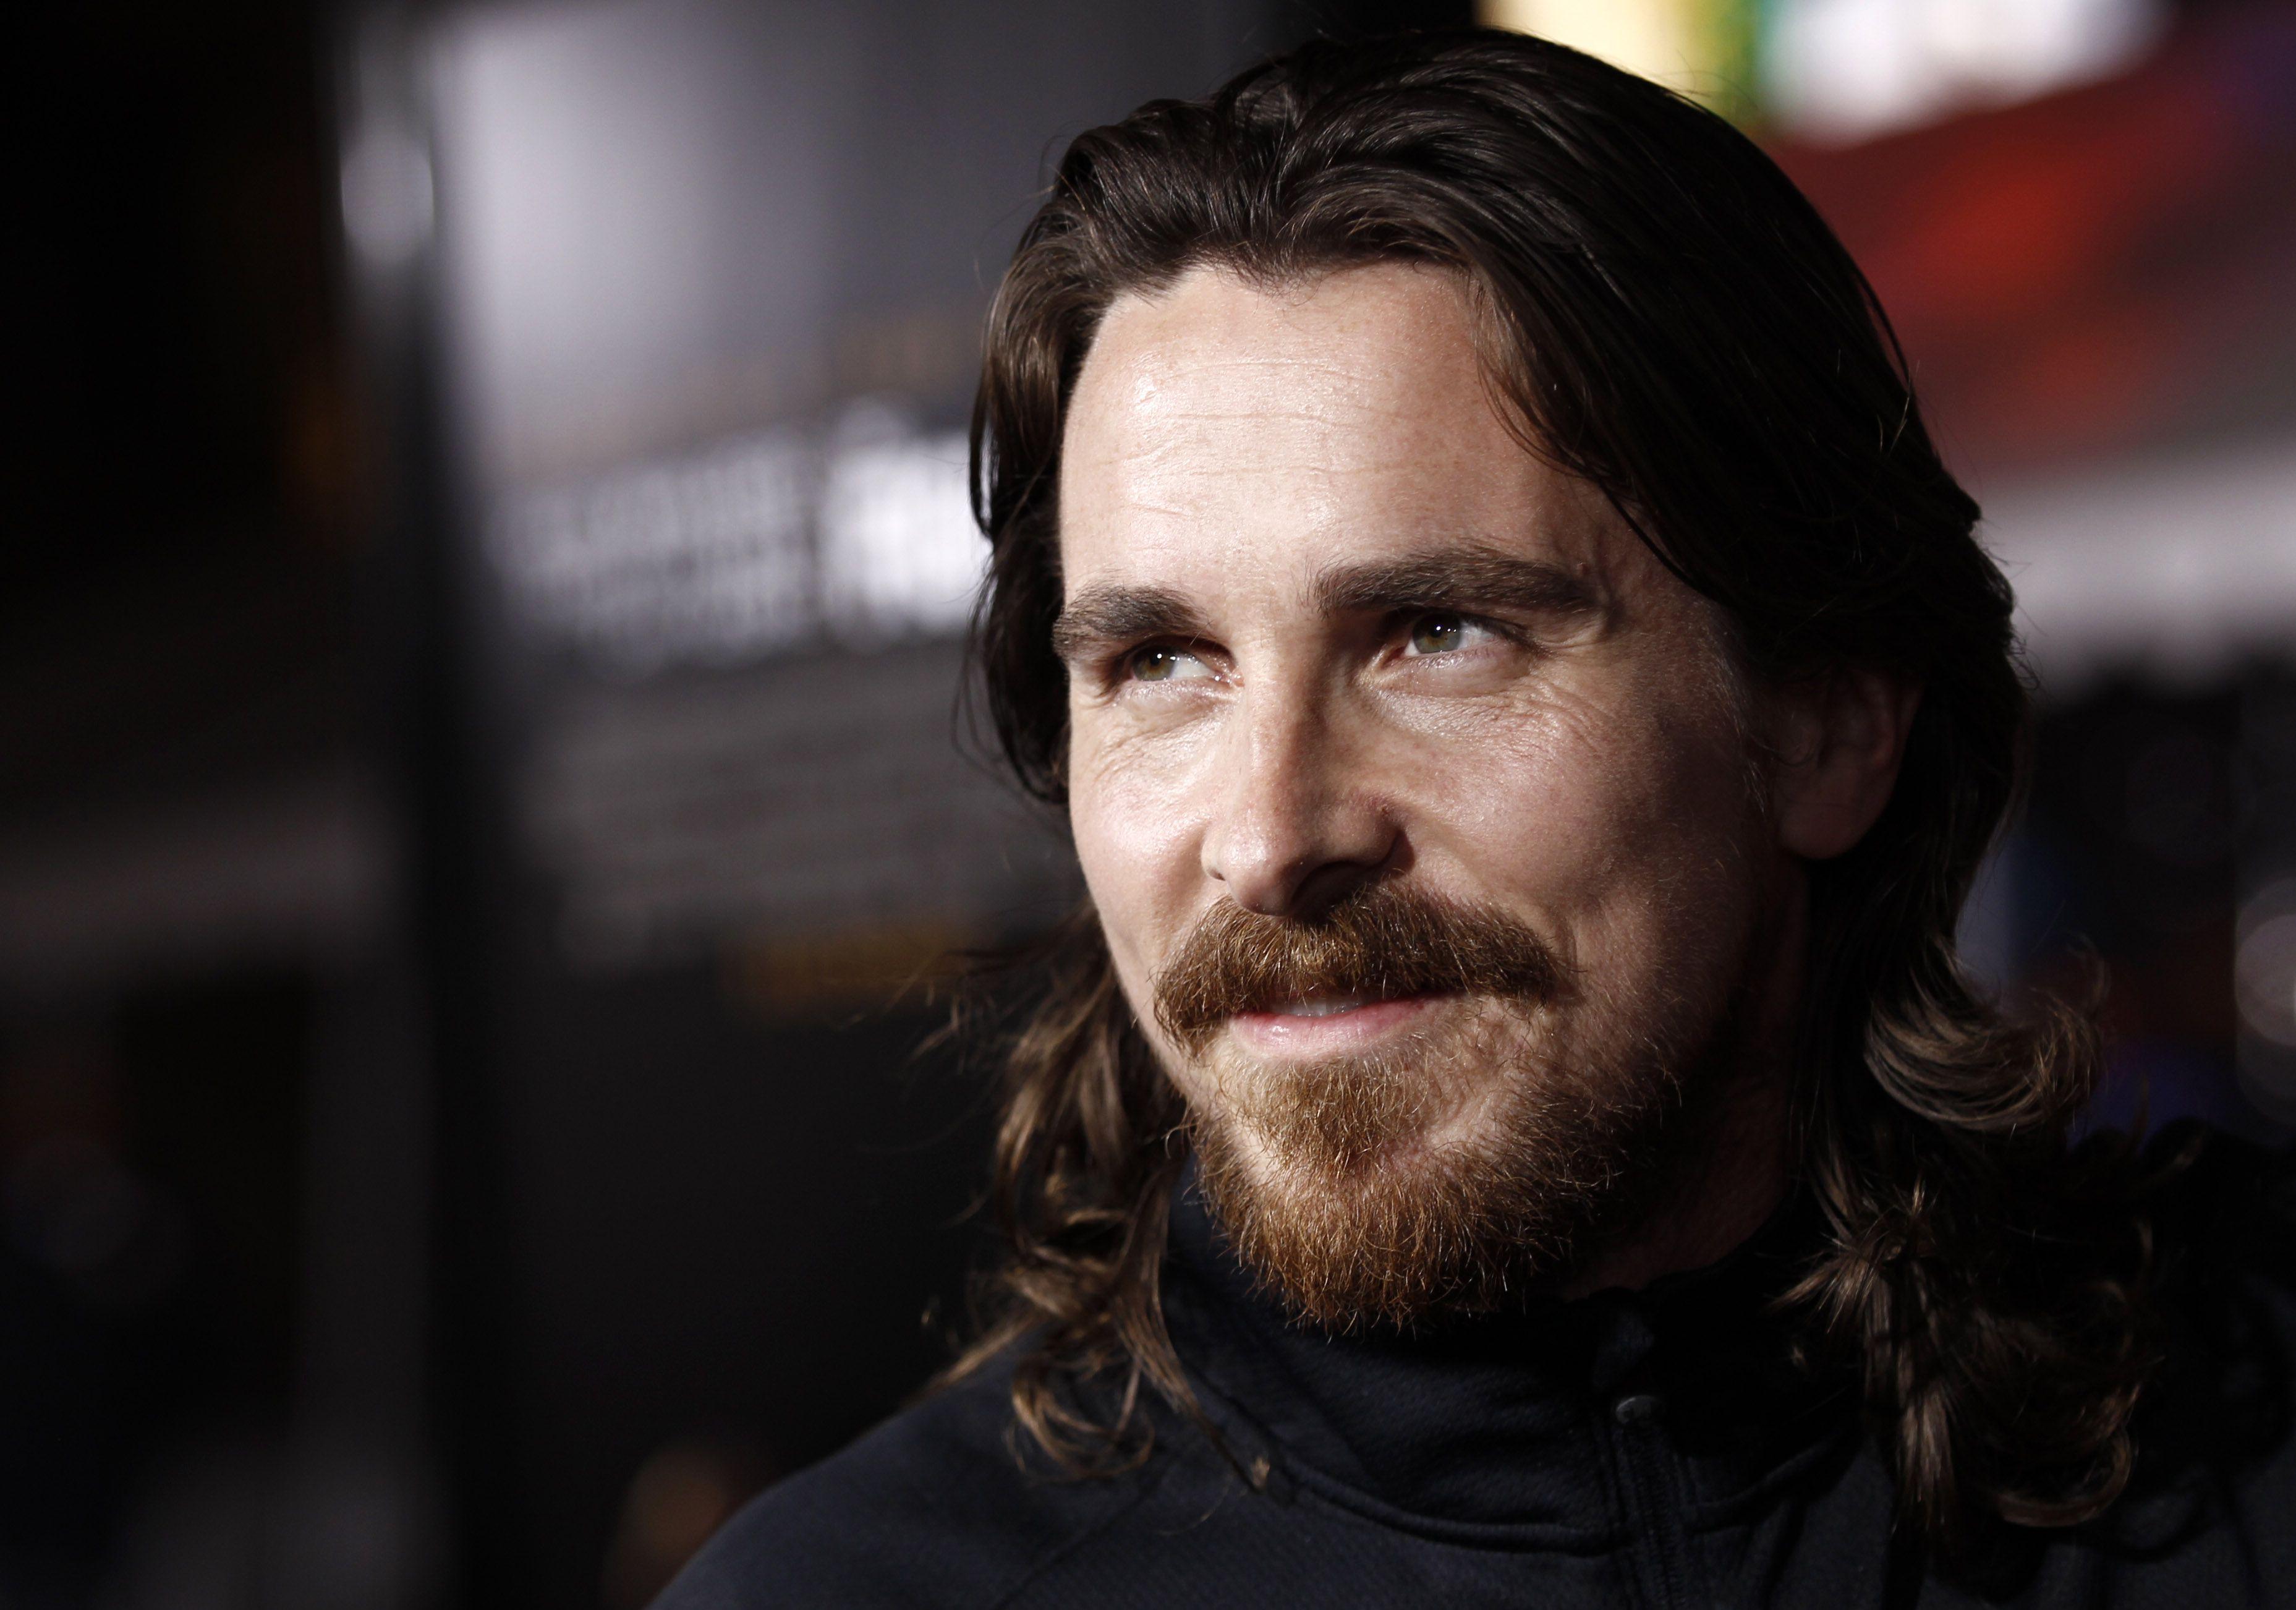 Christian Bale Wallpaper High Resolution and Quality Download